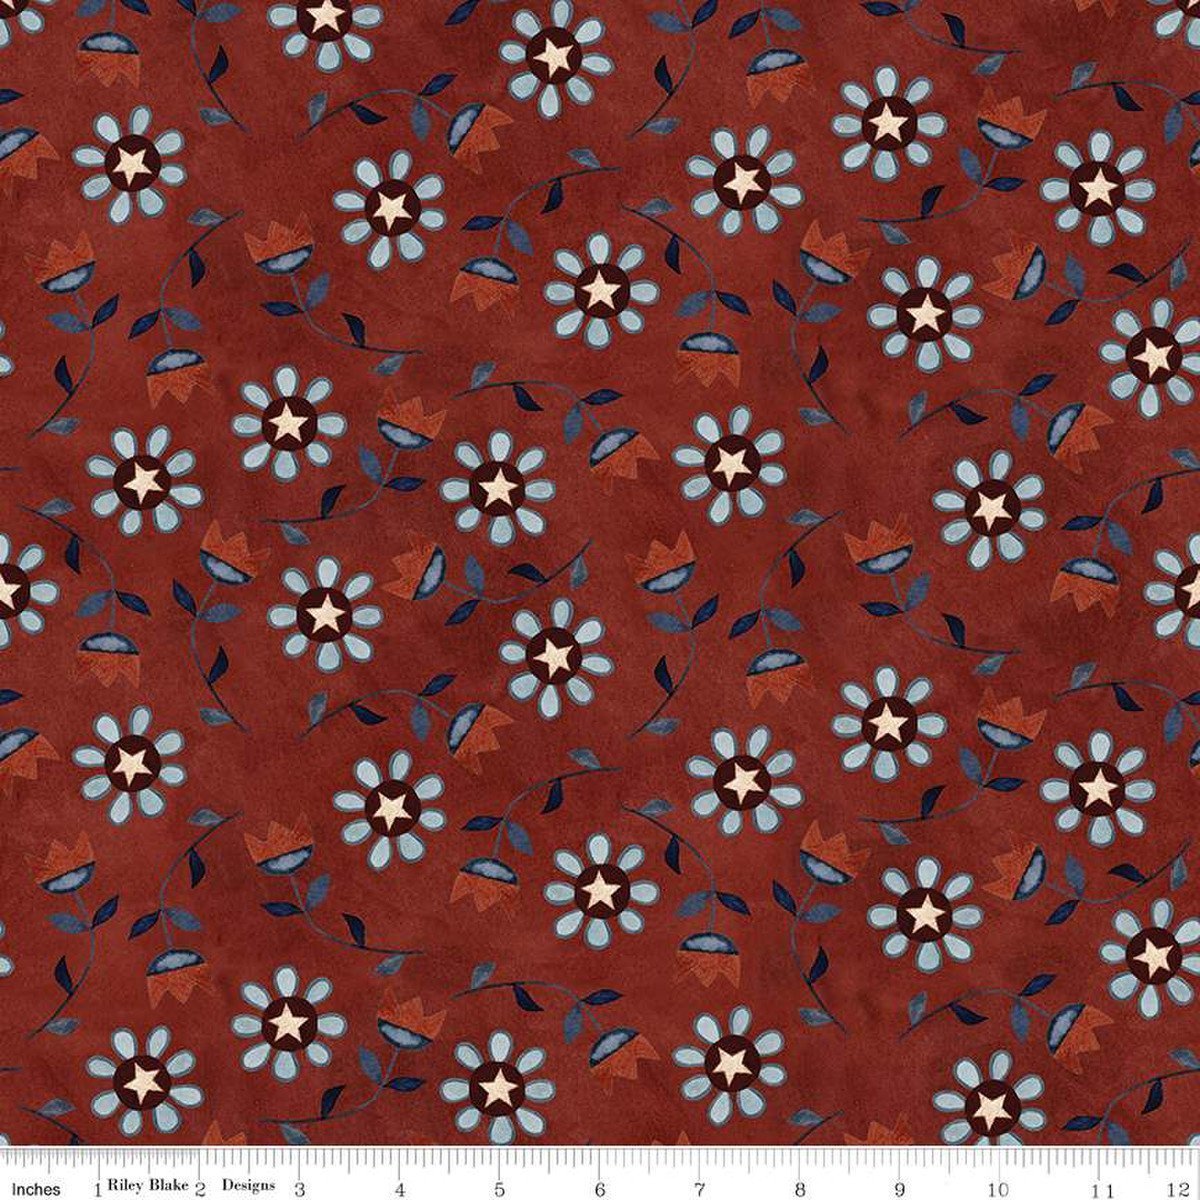 Bright Stars Floral Red Yardage by Teresa Kogut | Riley Blake Designs red background displaying blue flowers with white stars in center